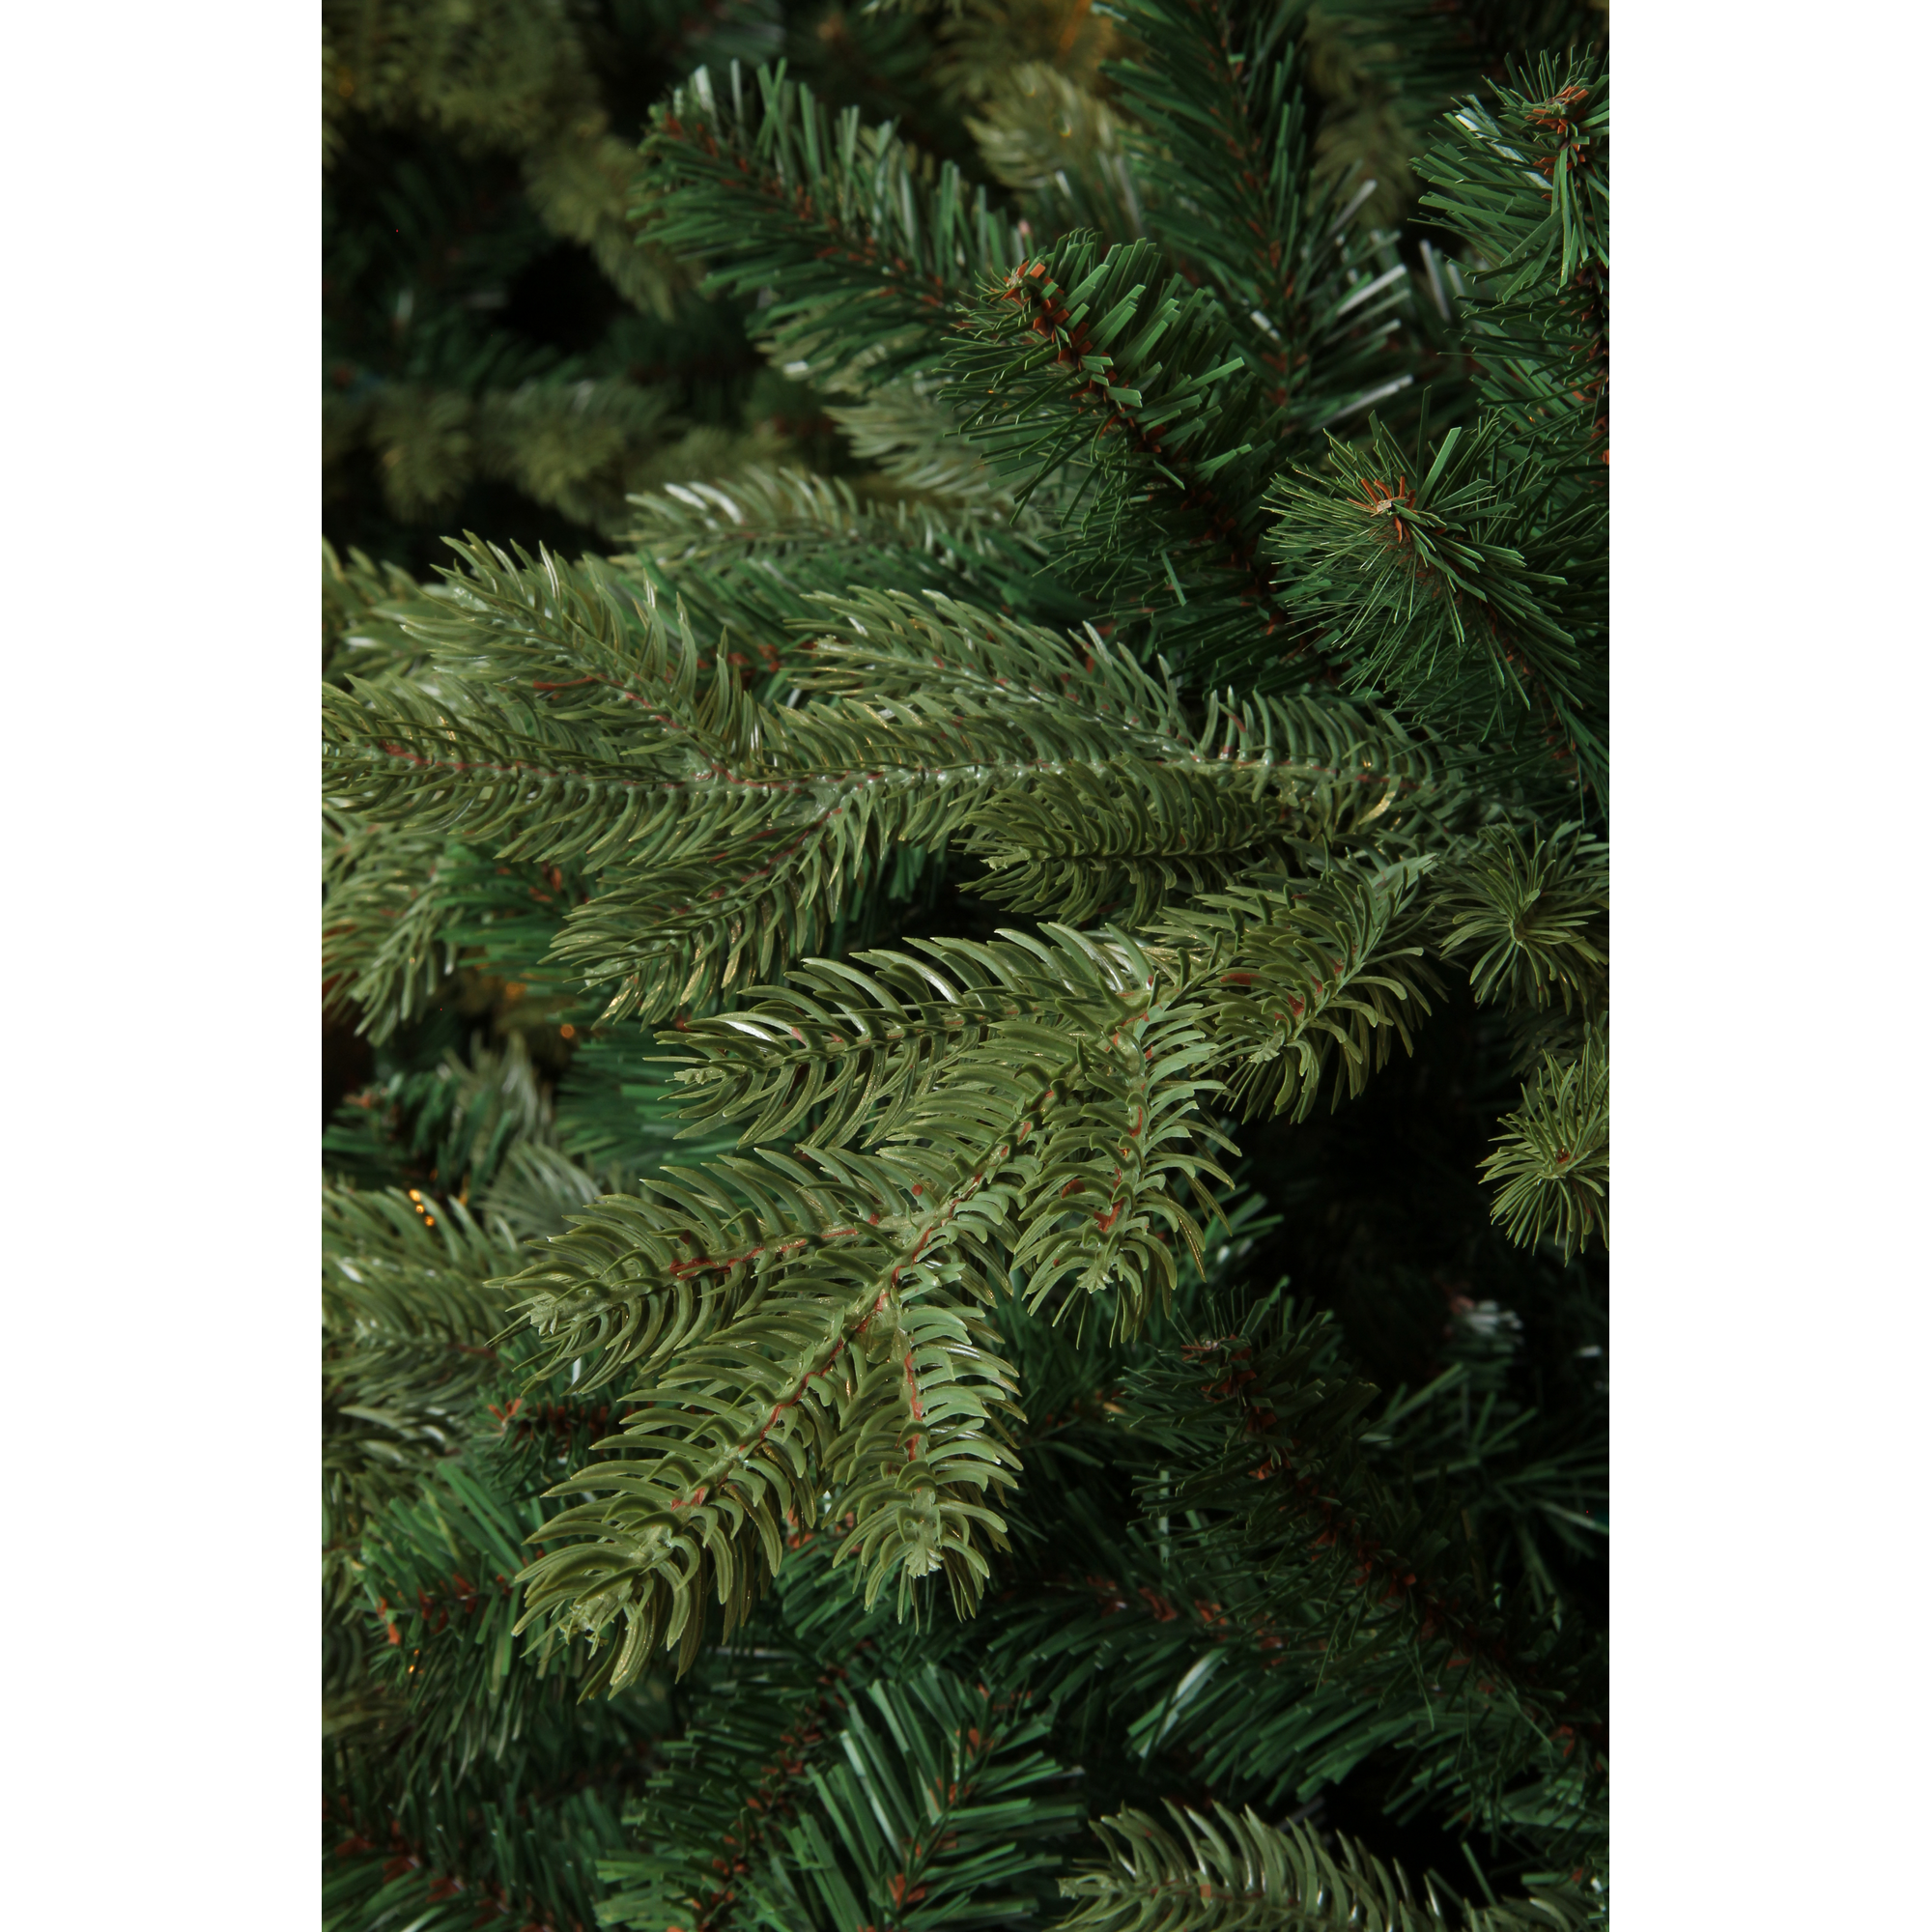 Weihnachtsbaum 'Sherwood' deluxe green 120 cm + product picture